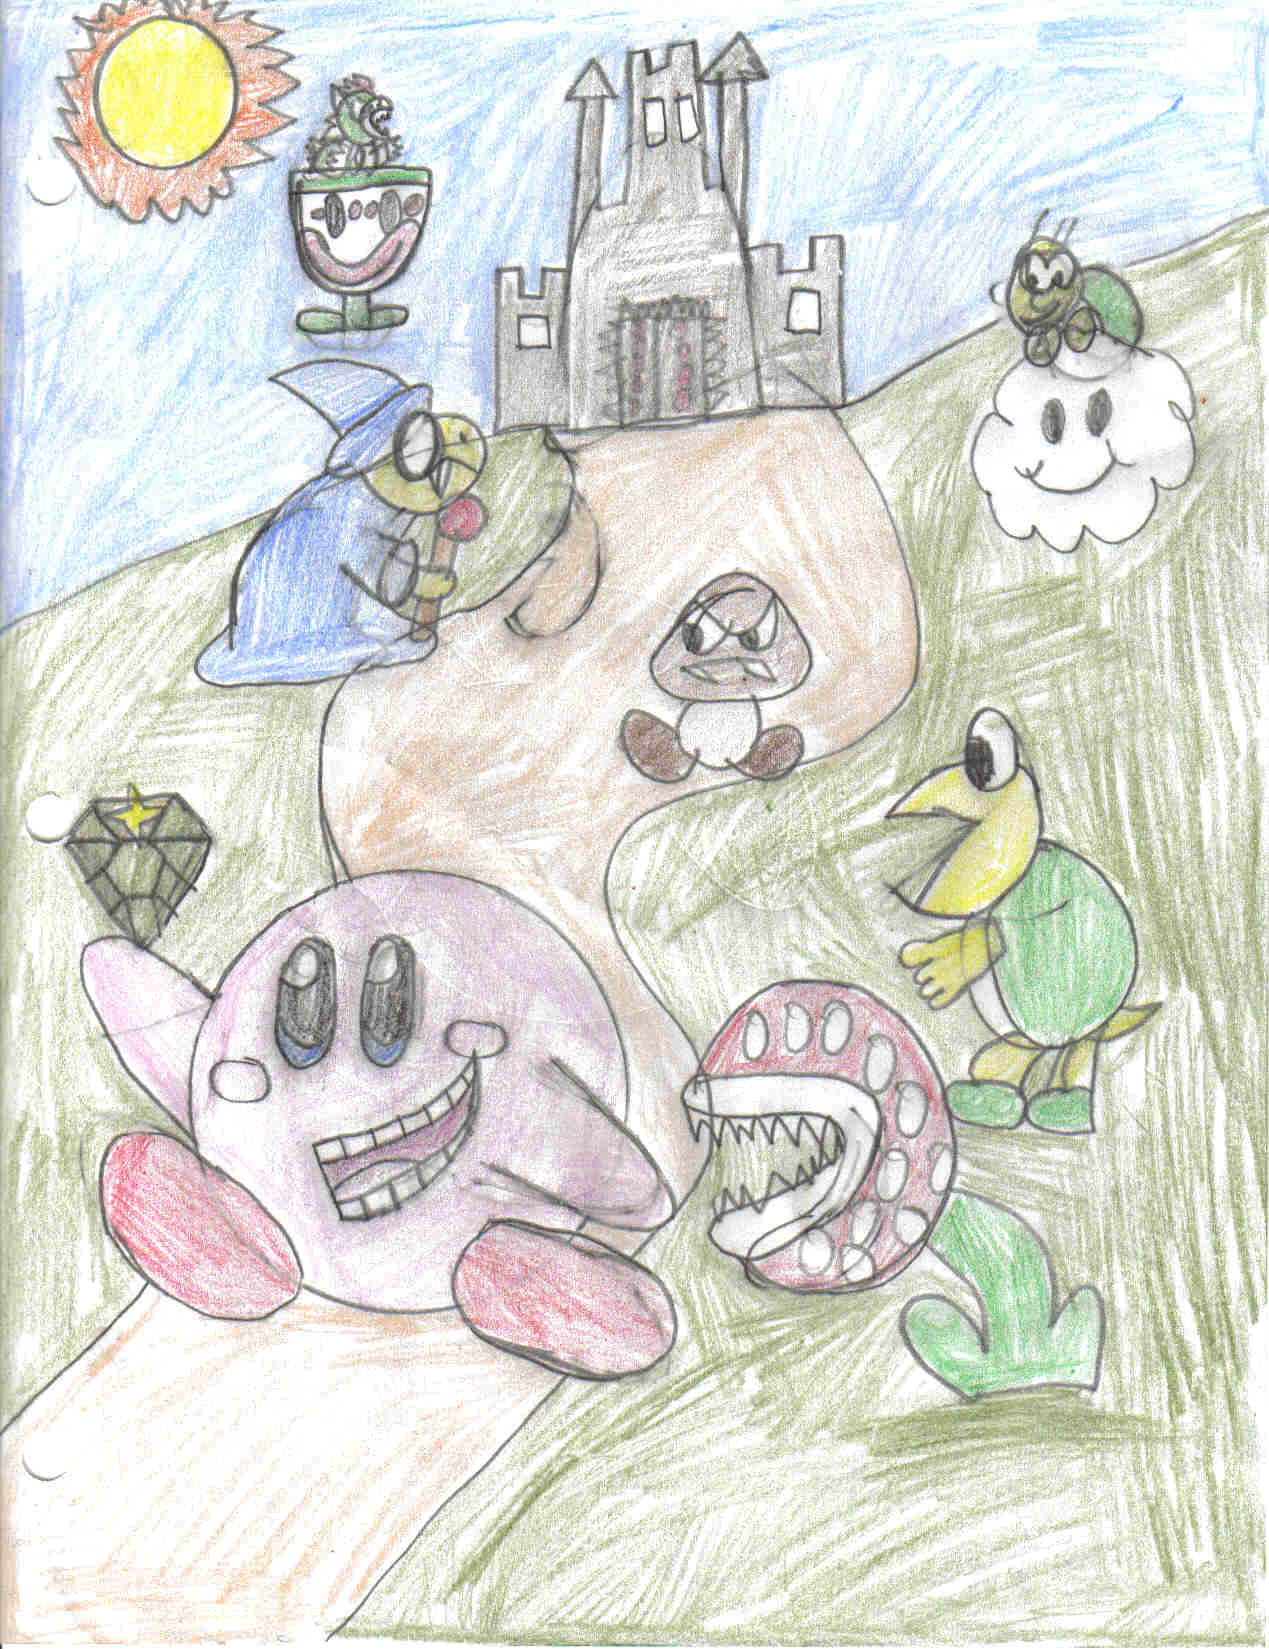 Get That Kirby! by DeadlyRain97